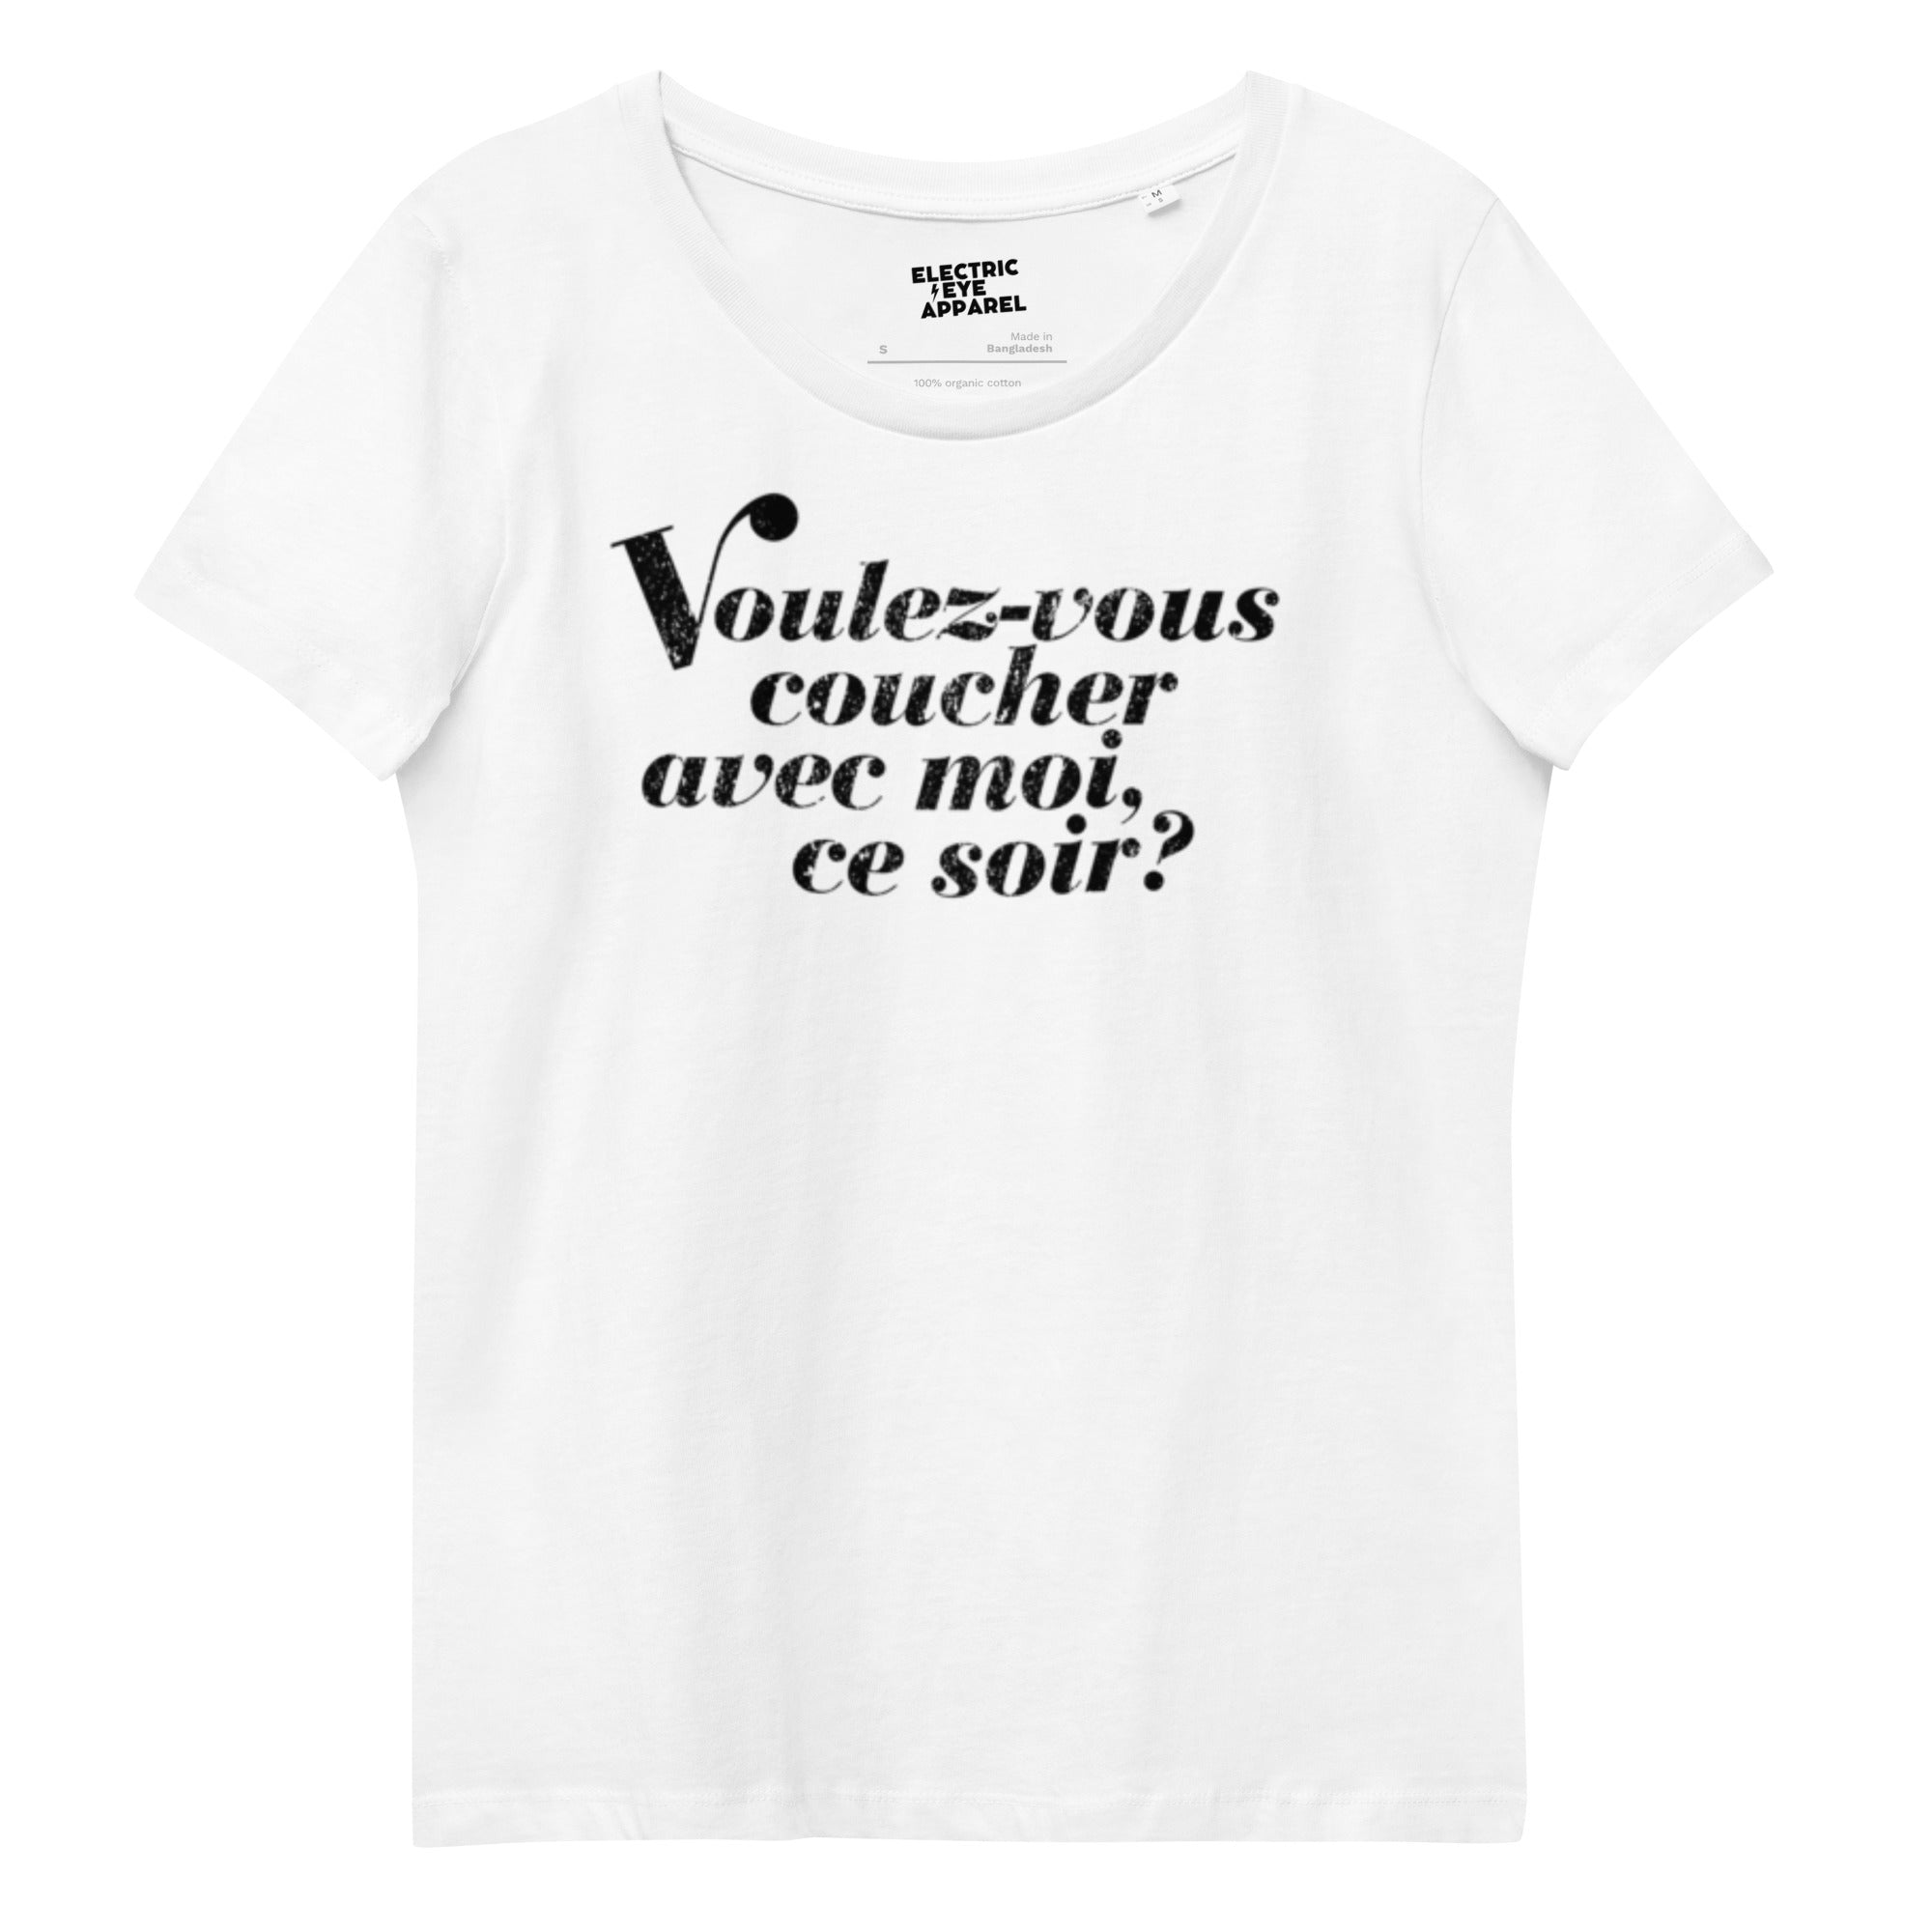 John Lennon Yoko Ono Inspired Vintage 70s Style 'Voulez-vous coucher' Premium Printed Women's fitted quality 100% organic cotton t-shirt